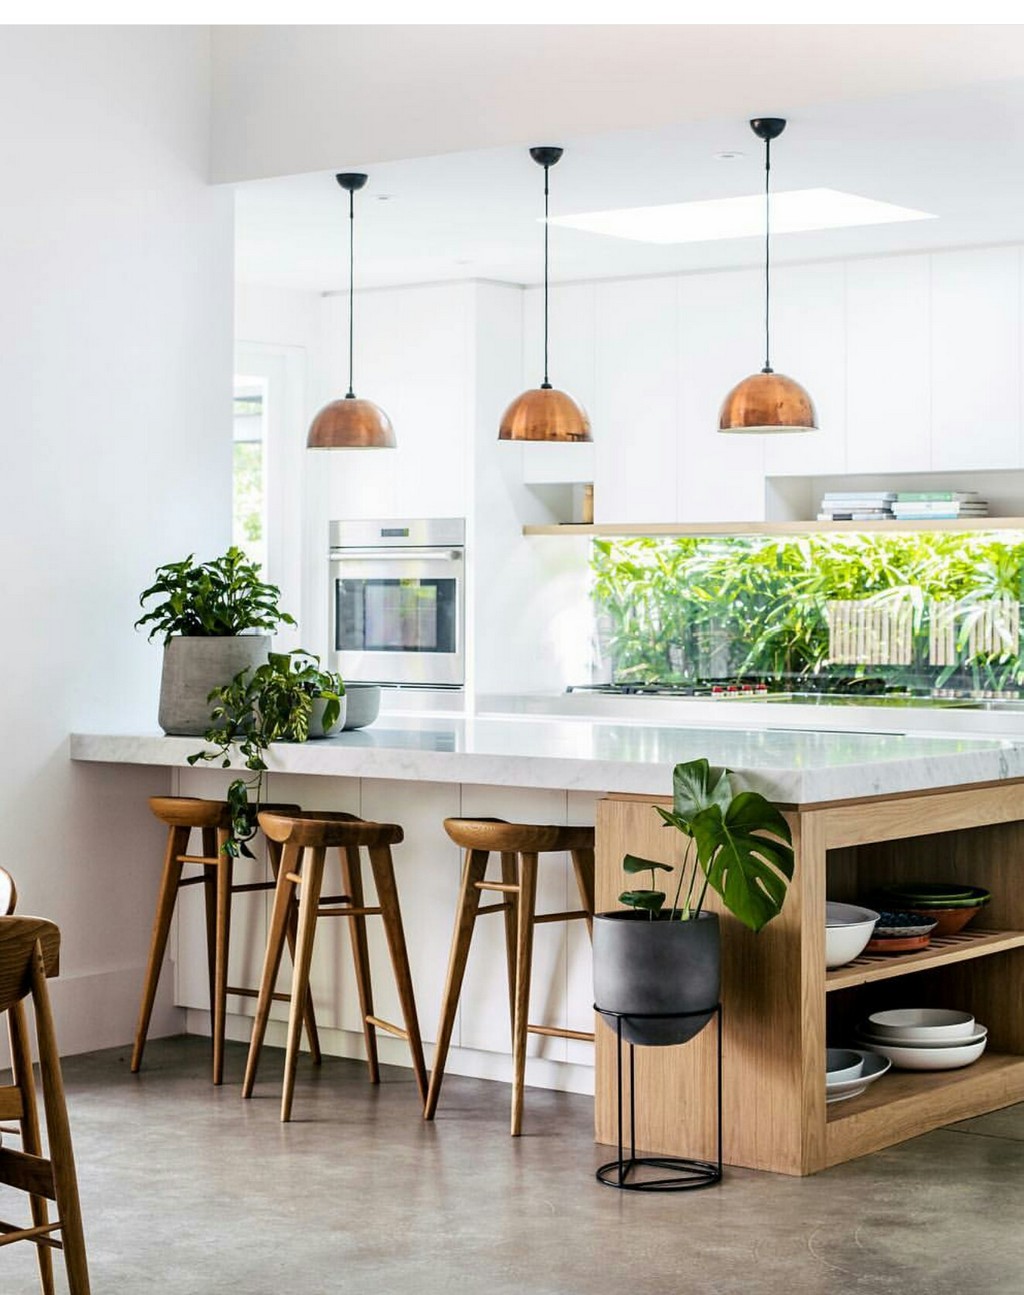 7 Kitchen Counter Stools That Will Uplift Your Décor